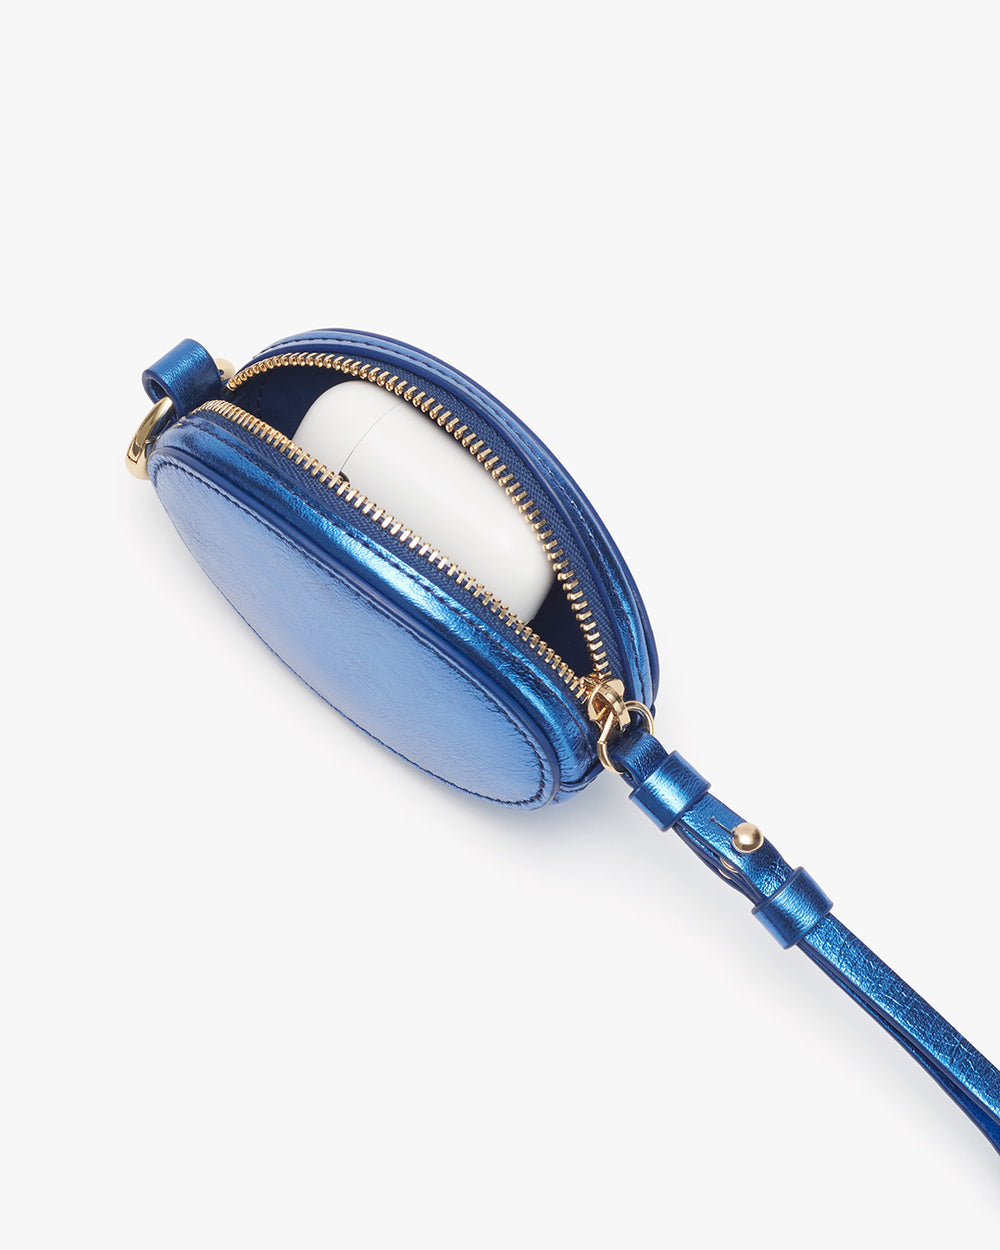 Small oval purse with a zipper and wrist strap, partially open revealing contents.